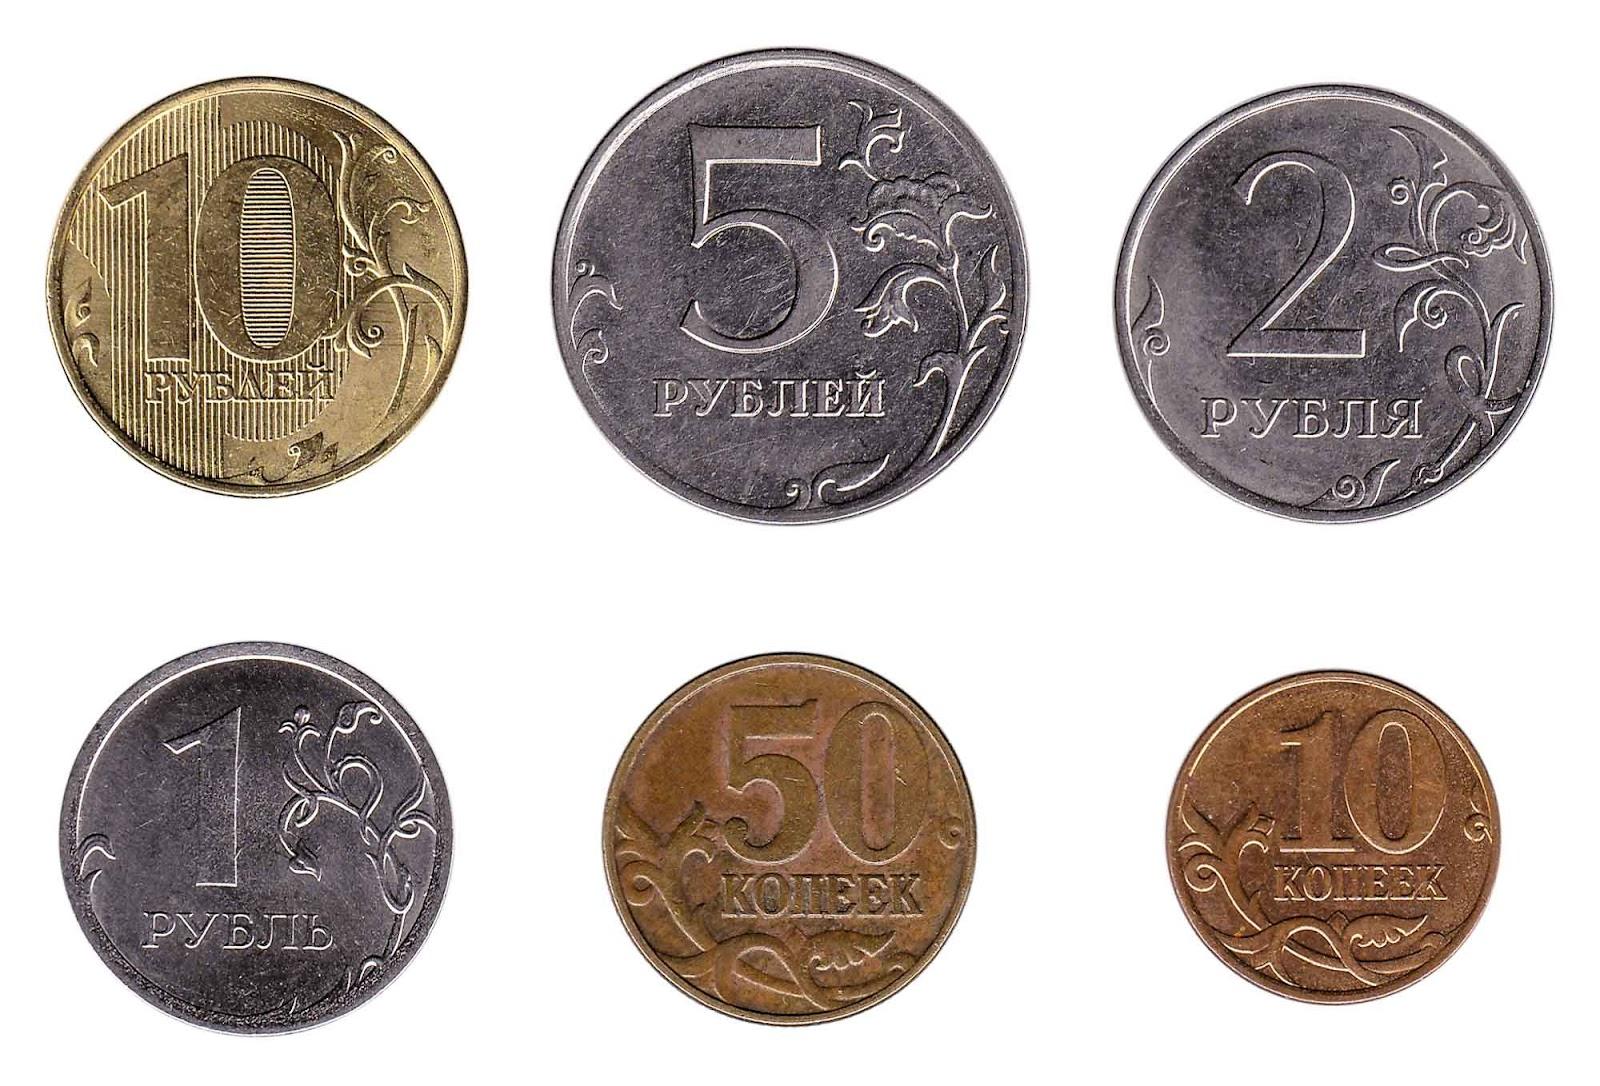 Russian Ruble coin series